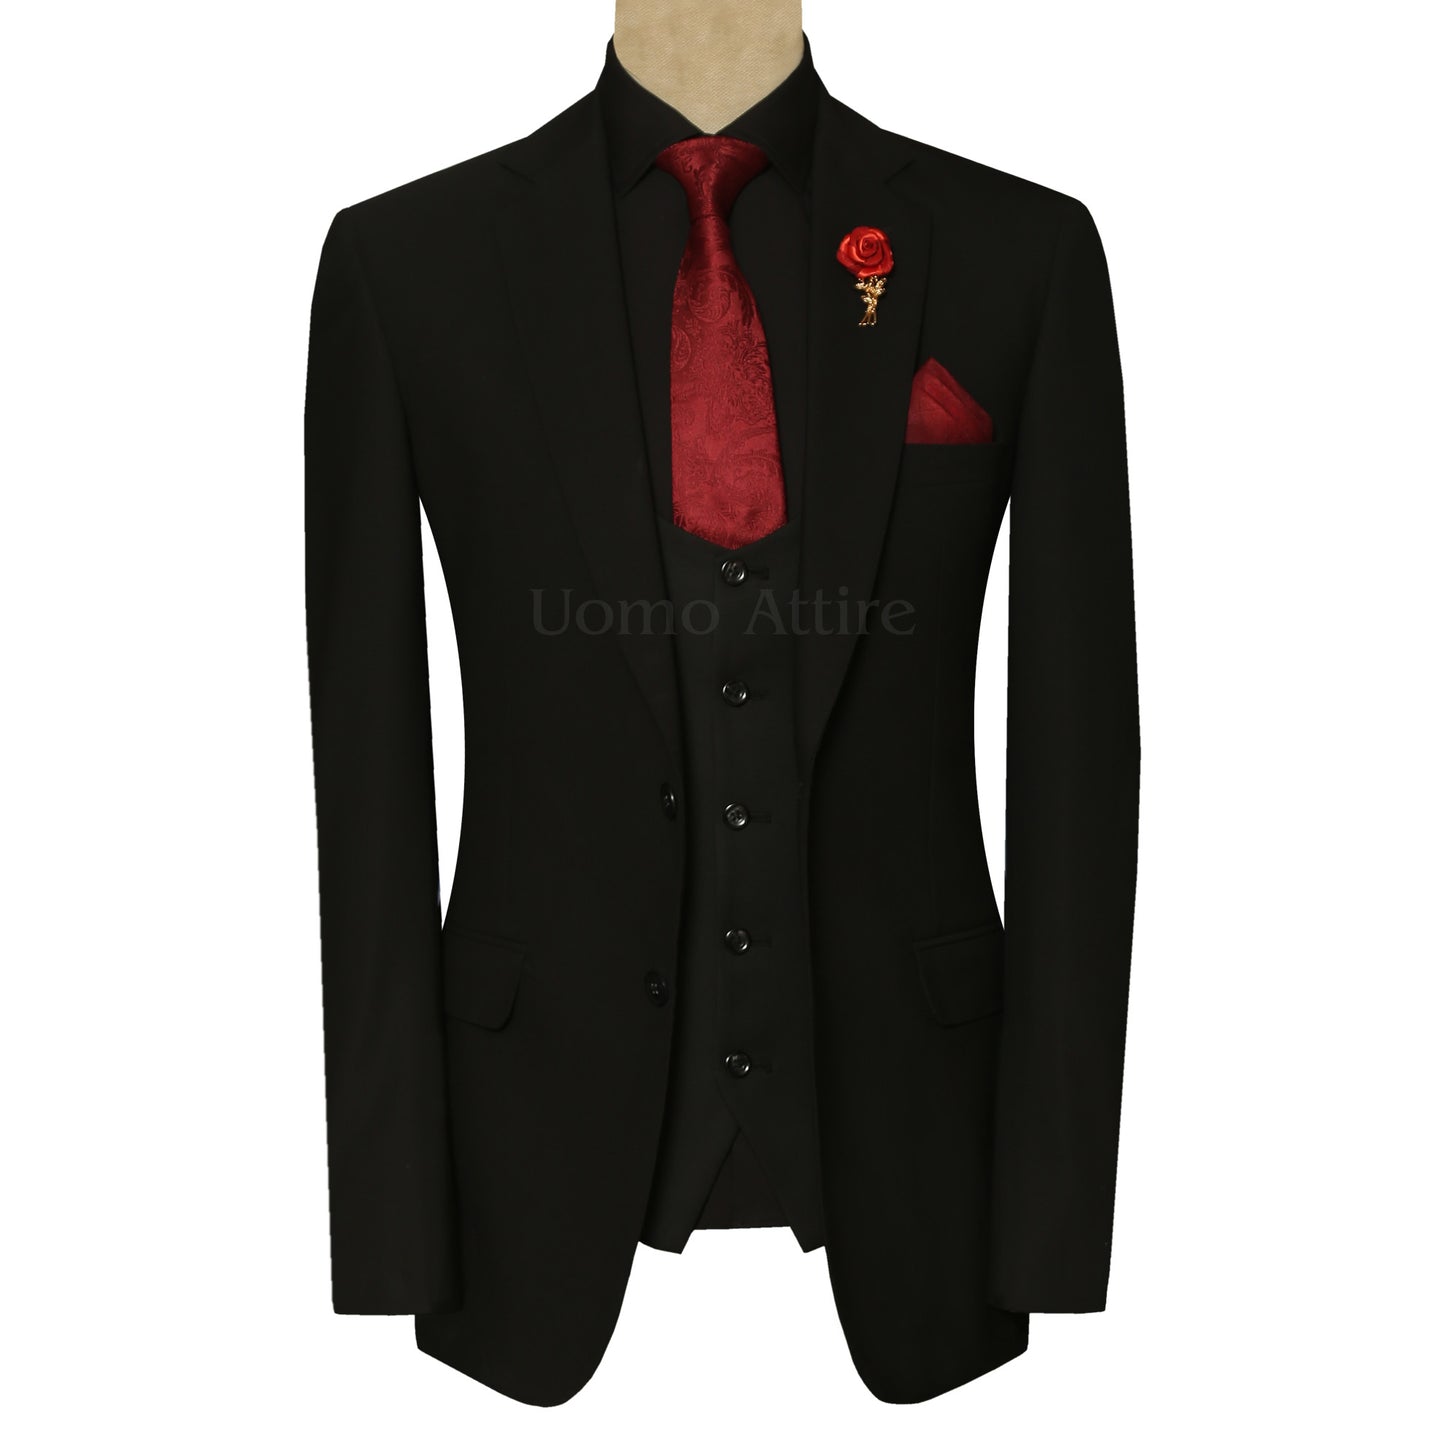 Discover more than 209 black maroon suit latest